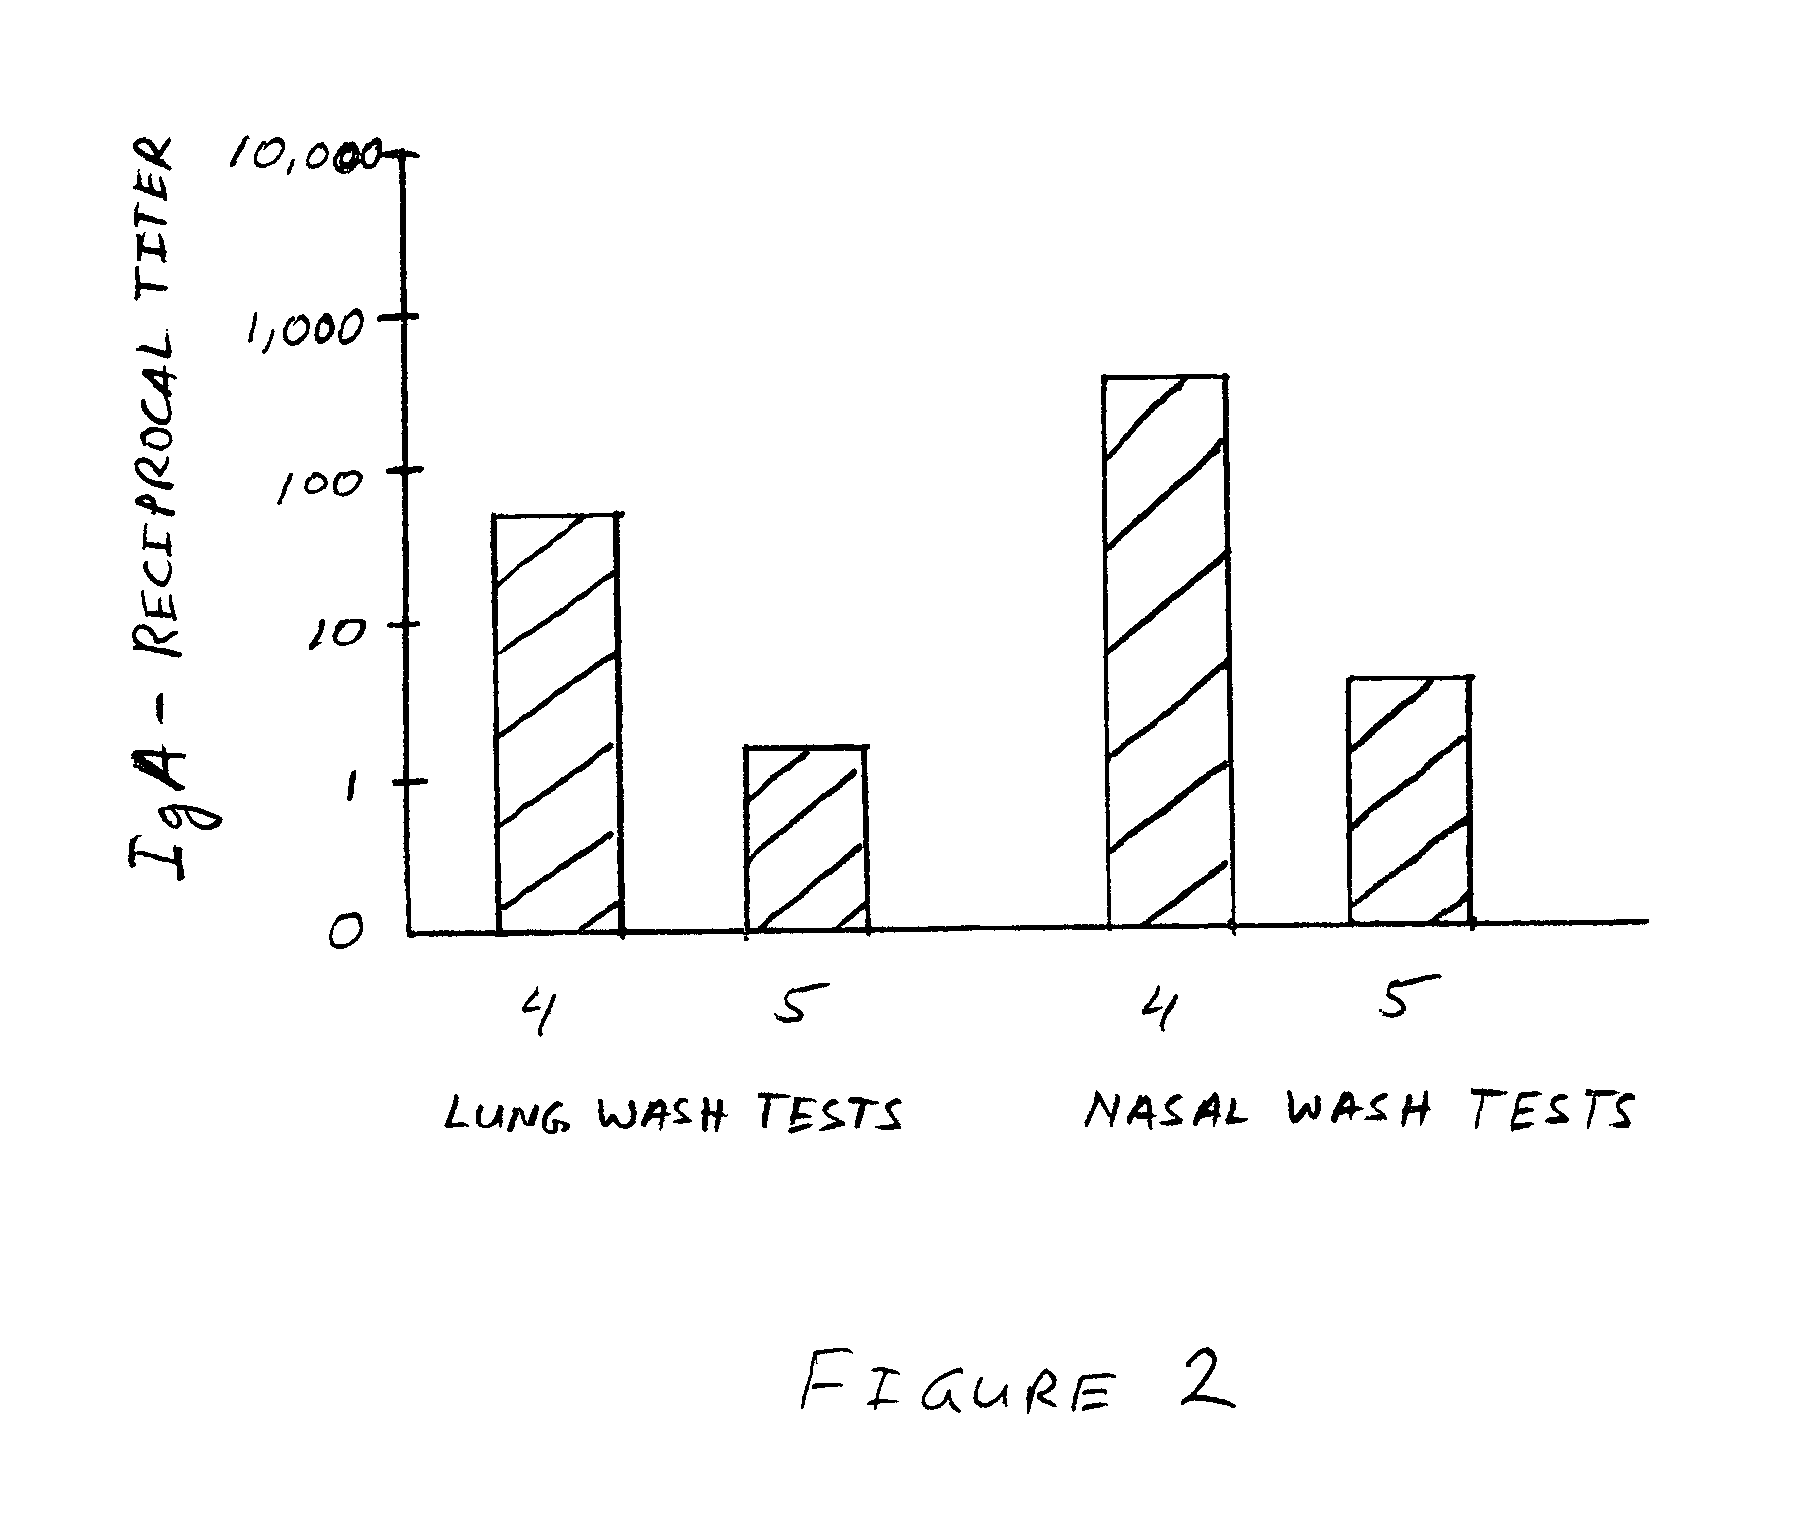 Delivery vehicle composition and methods for delivering antigens and other drugs